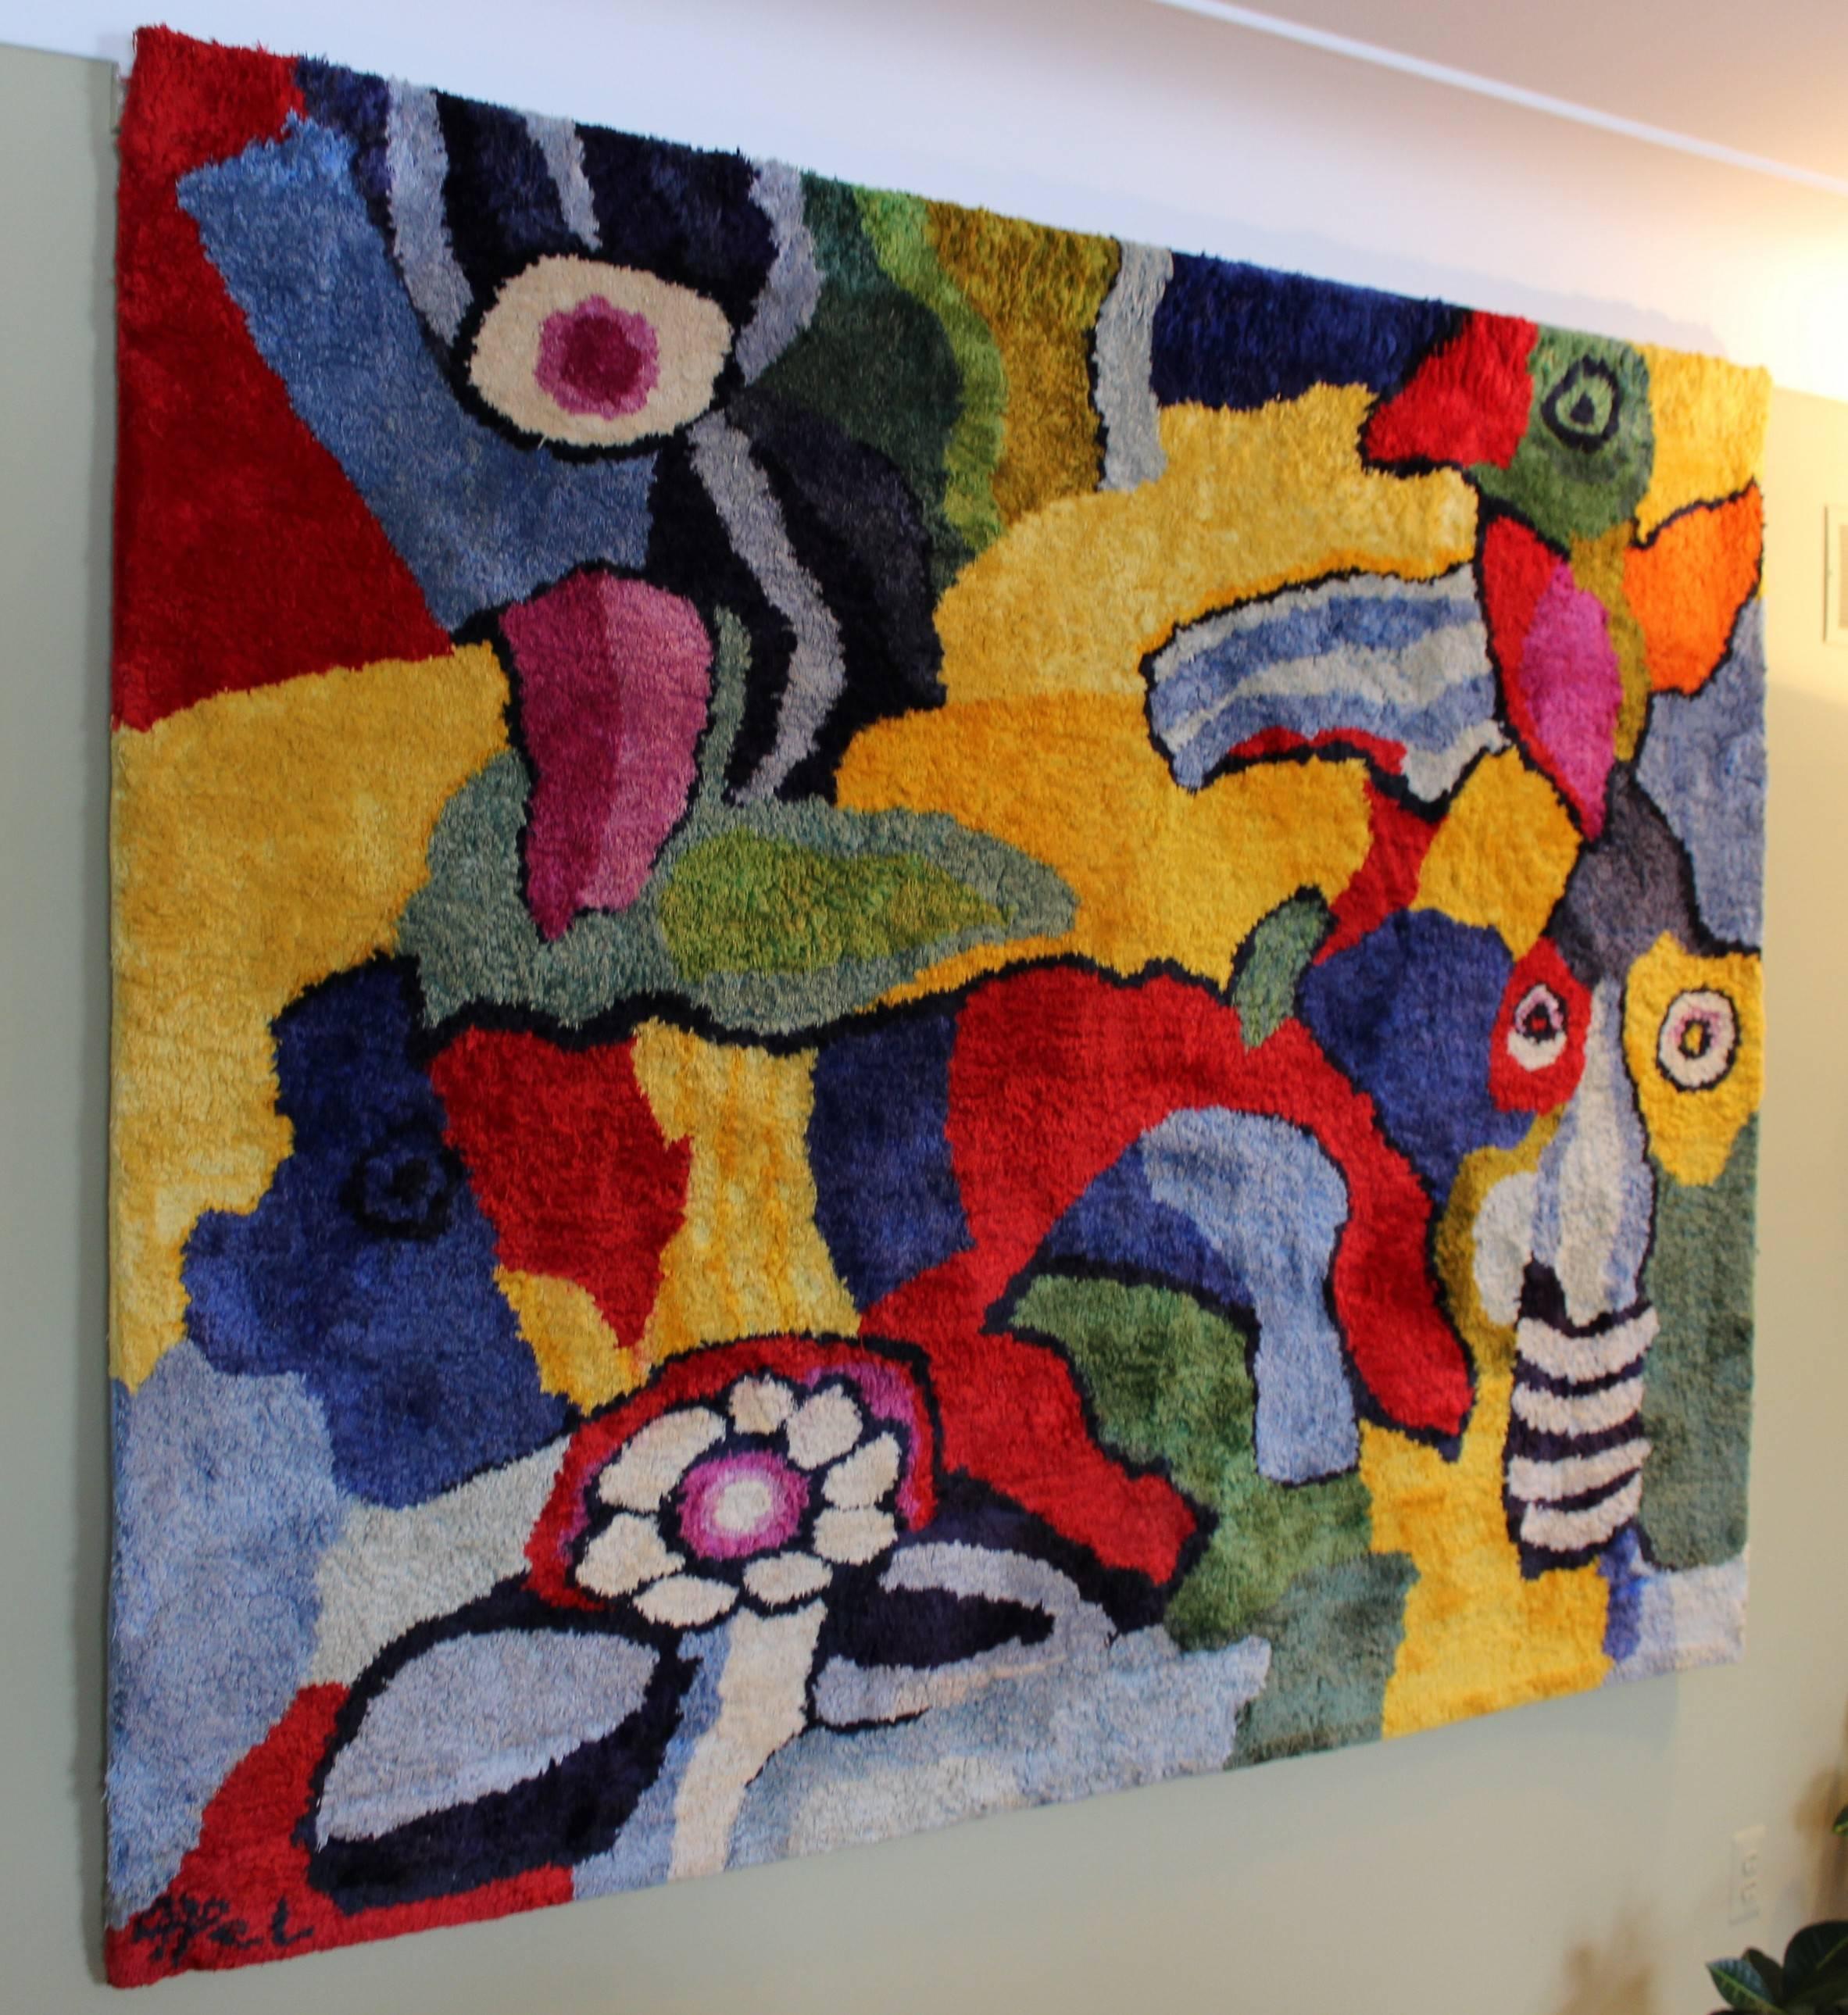 An amazing example of Appel's work in a wonderful rug/ wall hanging. Vibrant colors, whimsical imagery, a great complement to any decor. This stunning rug measures in at 82